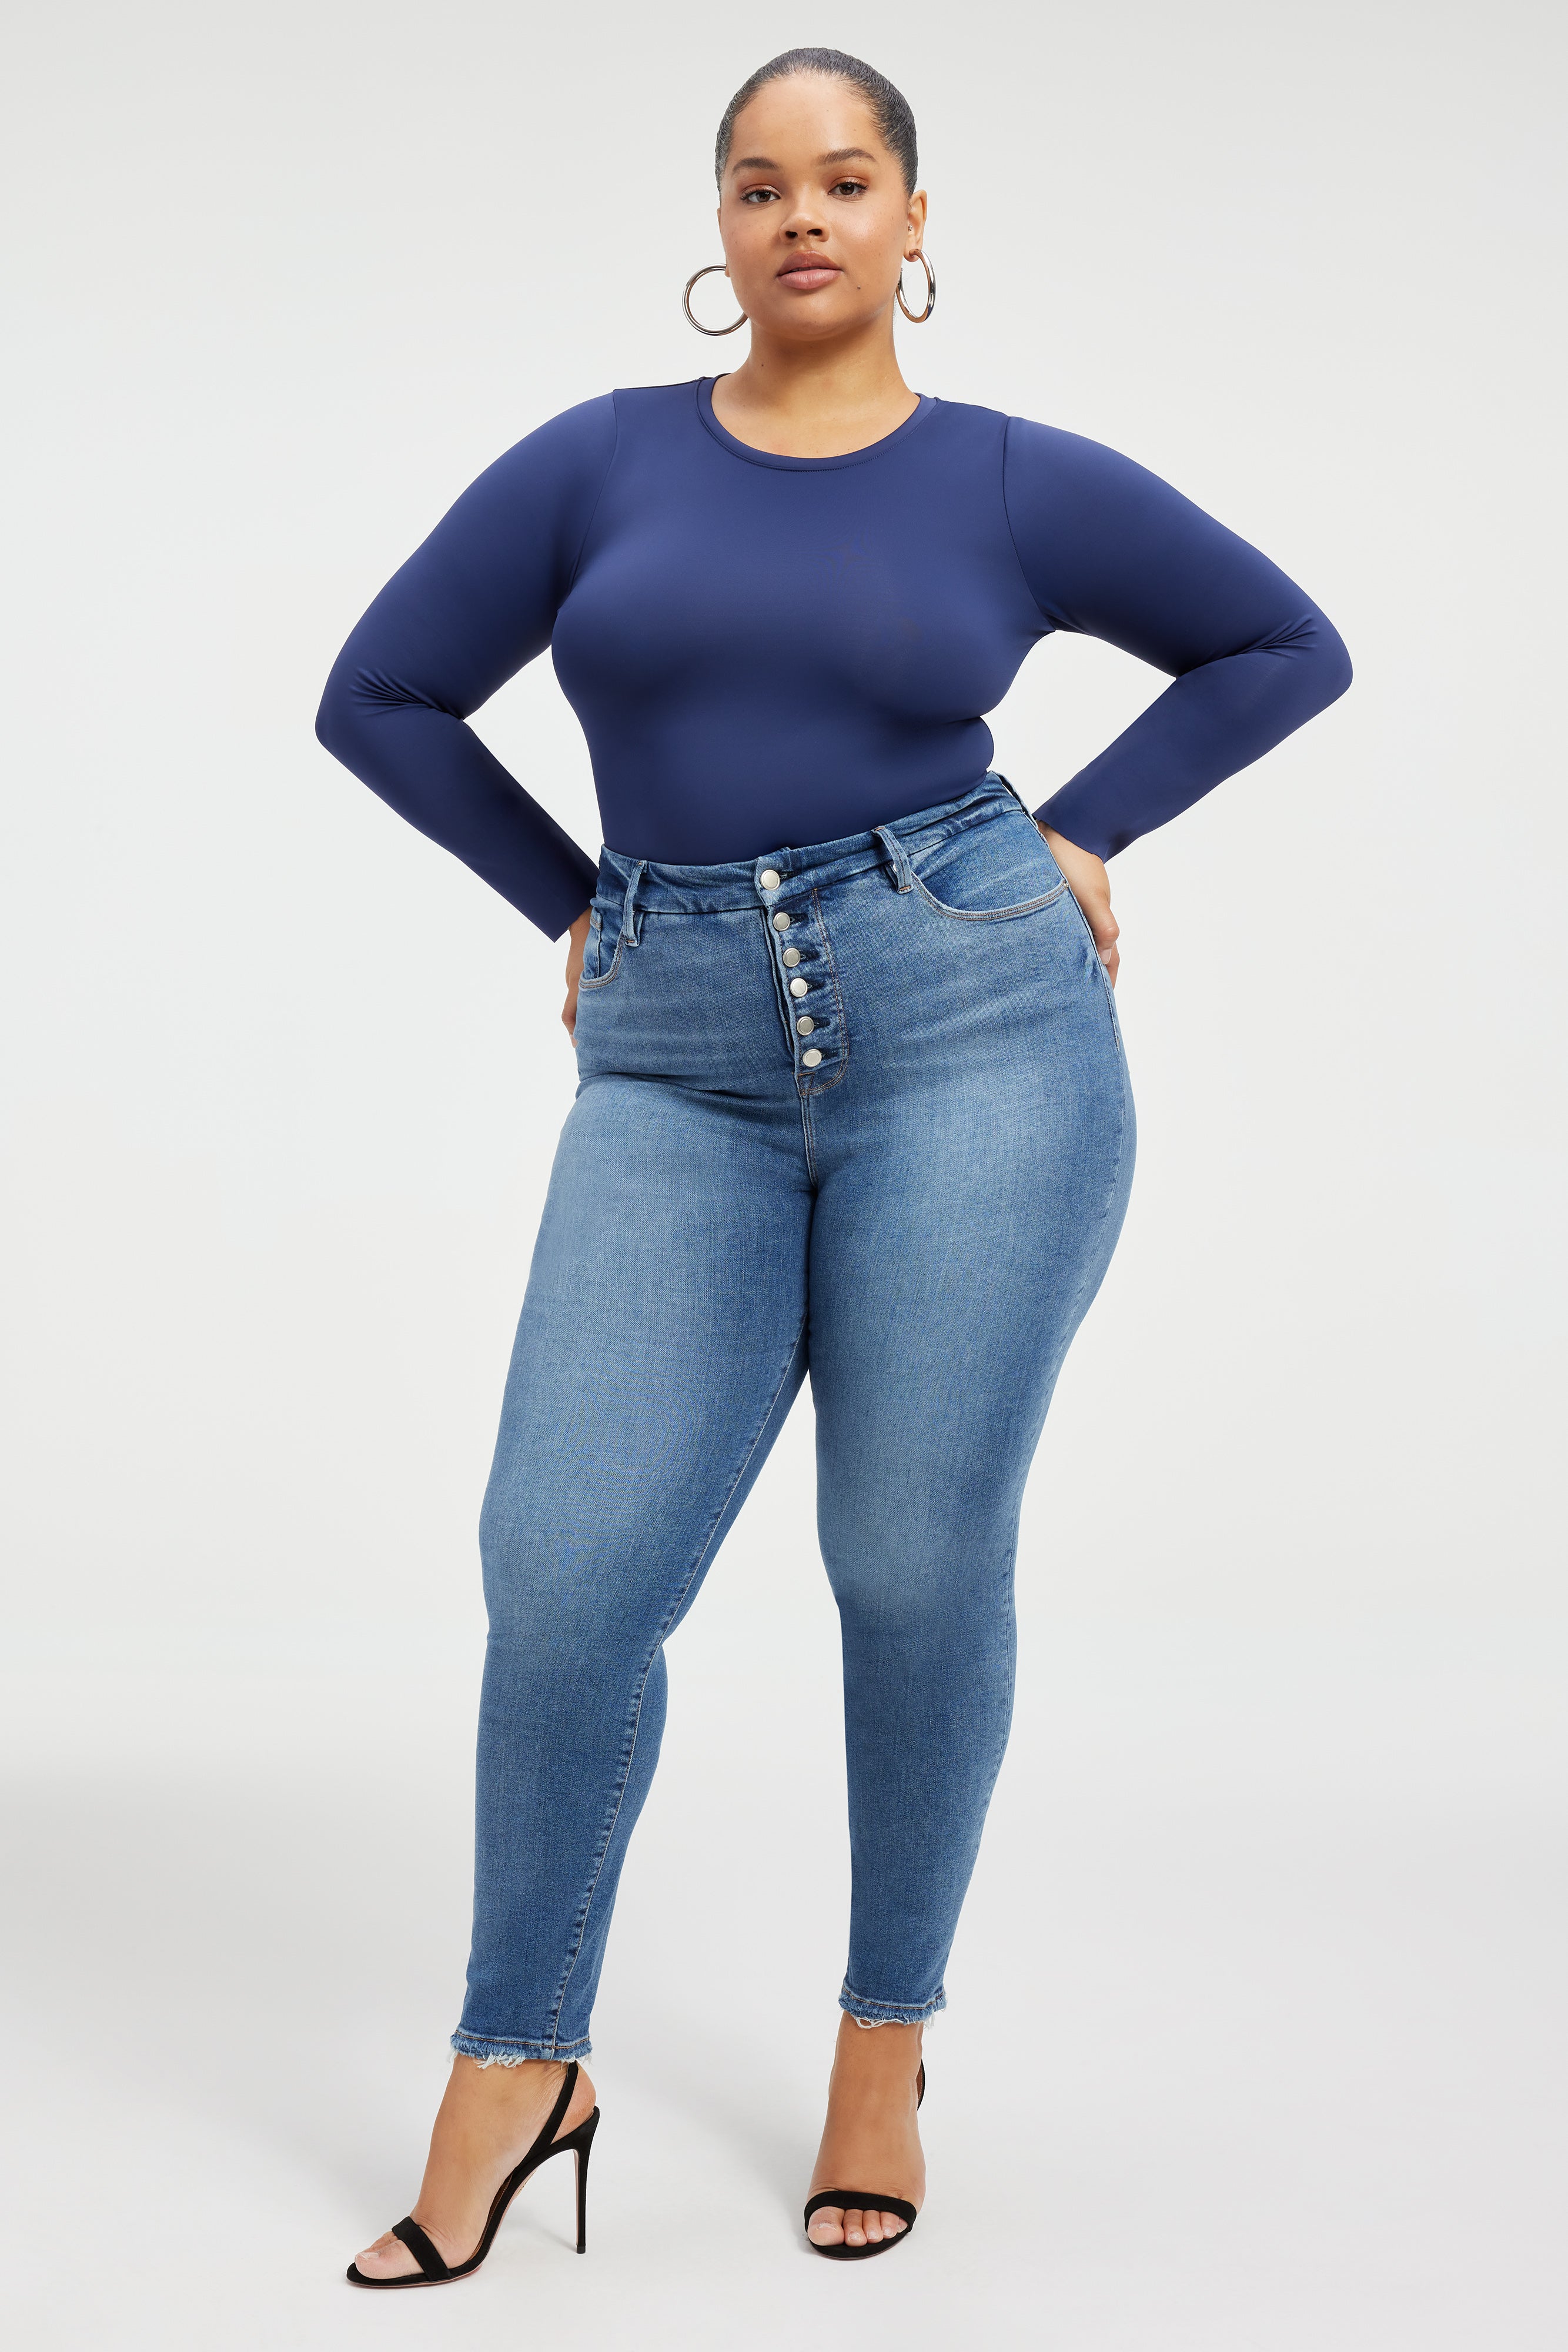 The Best Curvy Jeans for Women That Fit So | Wear